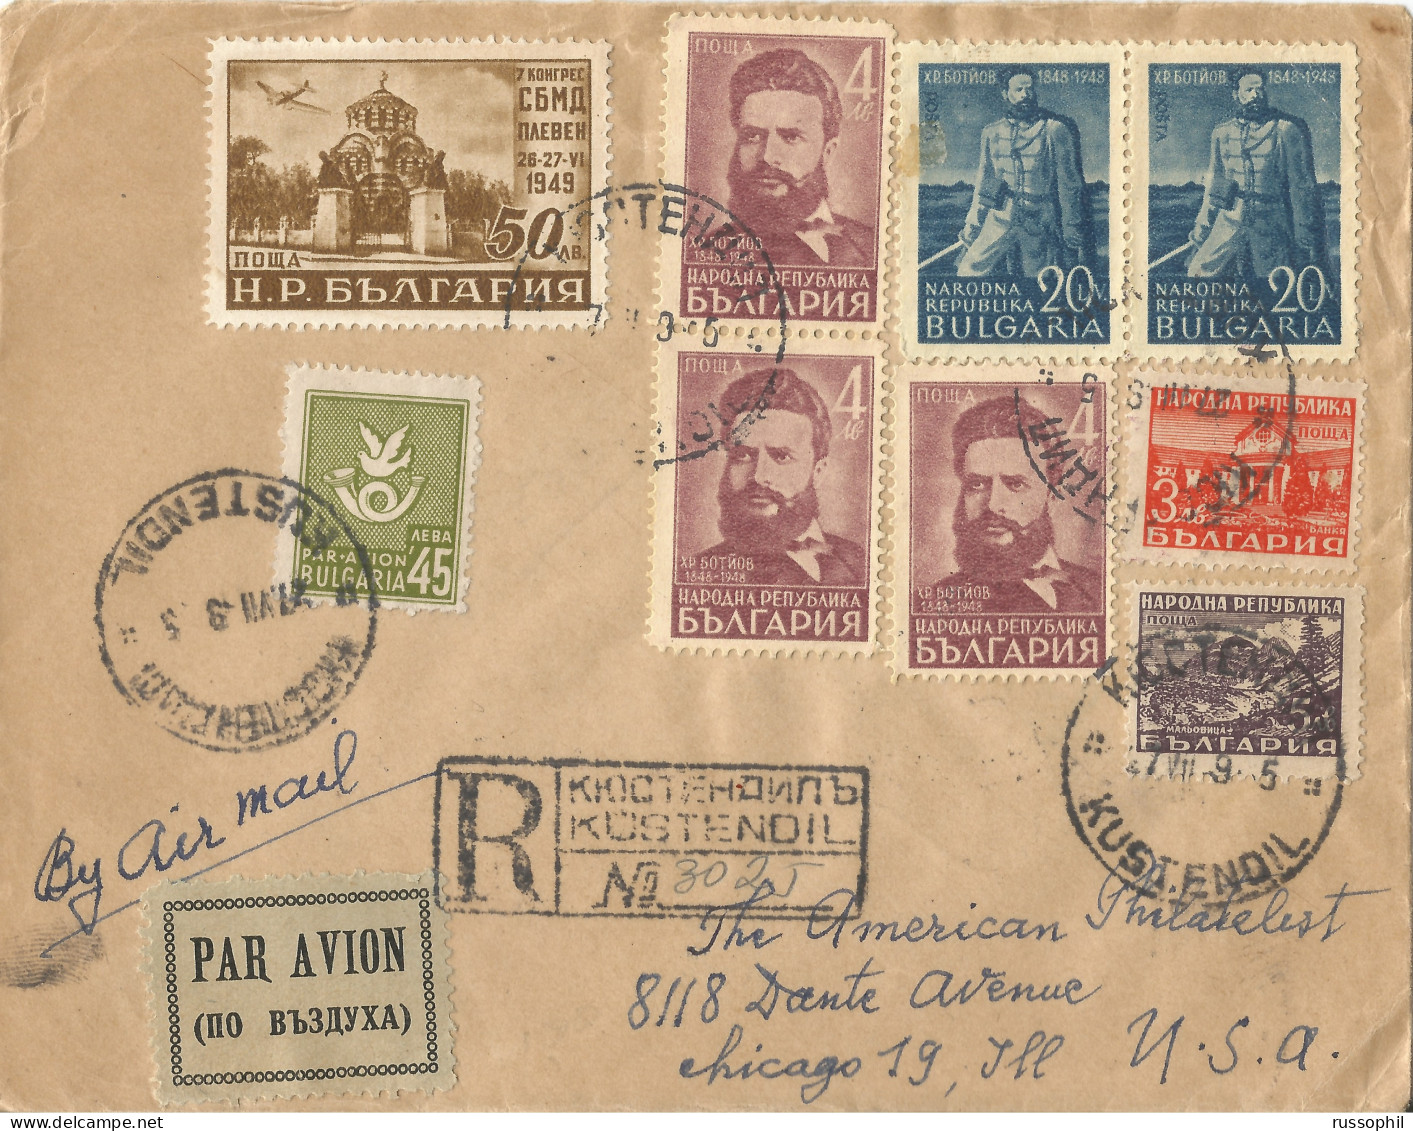 AUSTRIA - 224 GR.  10 STAMP FRANKING ON REGISTERED COVER TO THE USA - USA AUSTELLUNG WIEN  - 1946 - Covers & Documents